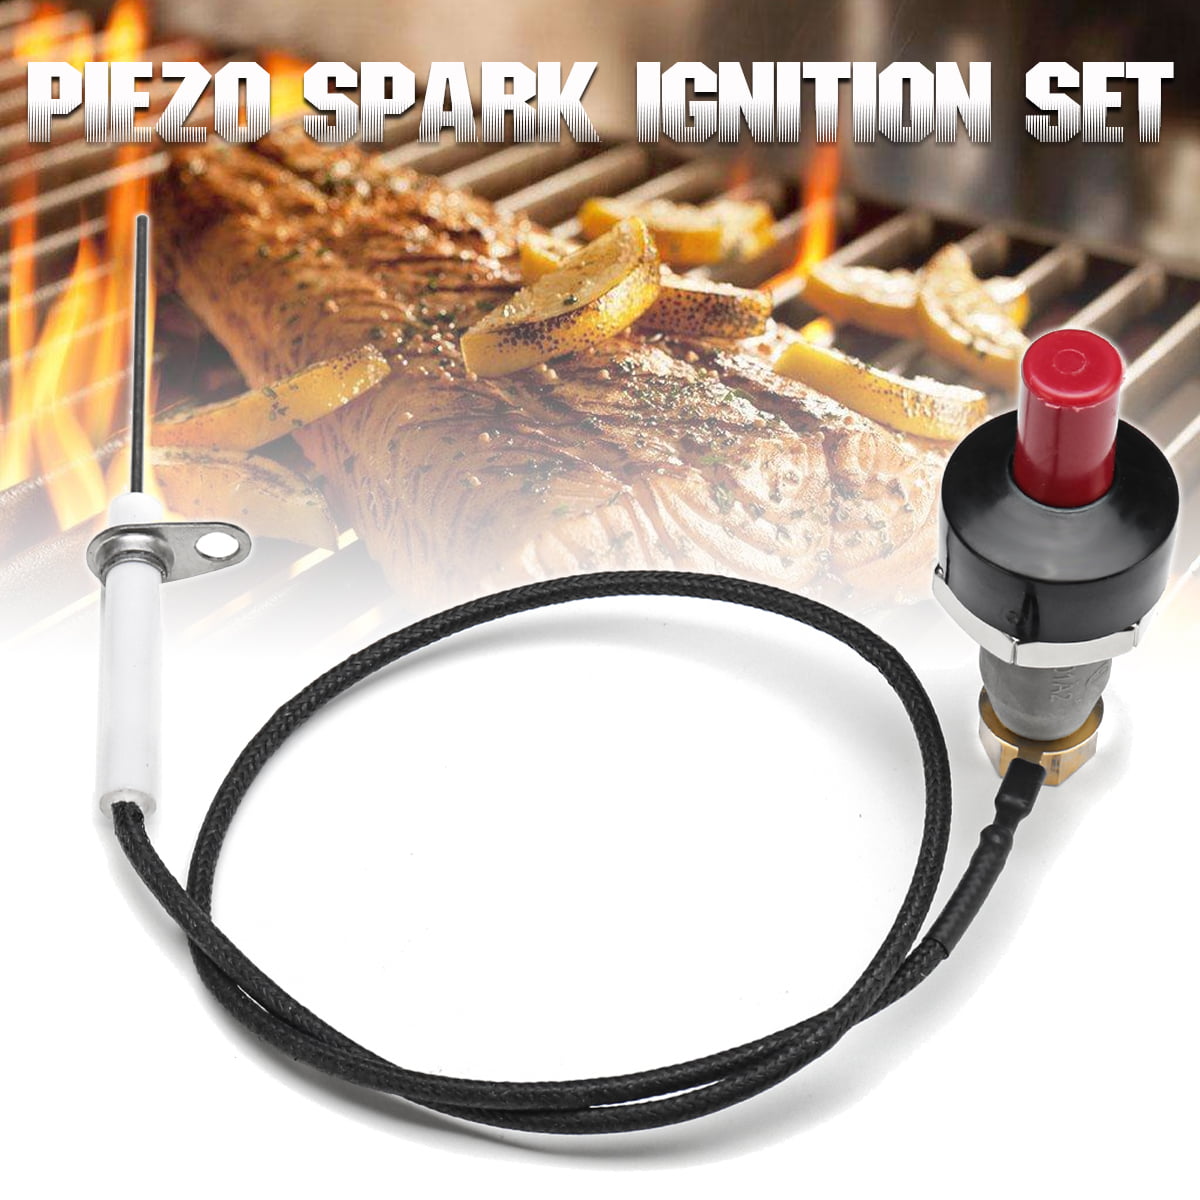 Ignition Kit-1 Out 2 Piezo Spark Ignition Kit BBQ Grill Push Button Igniter for Fireplace Stove Gas 